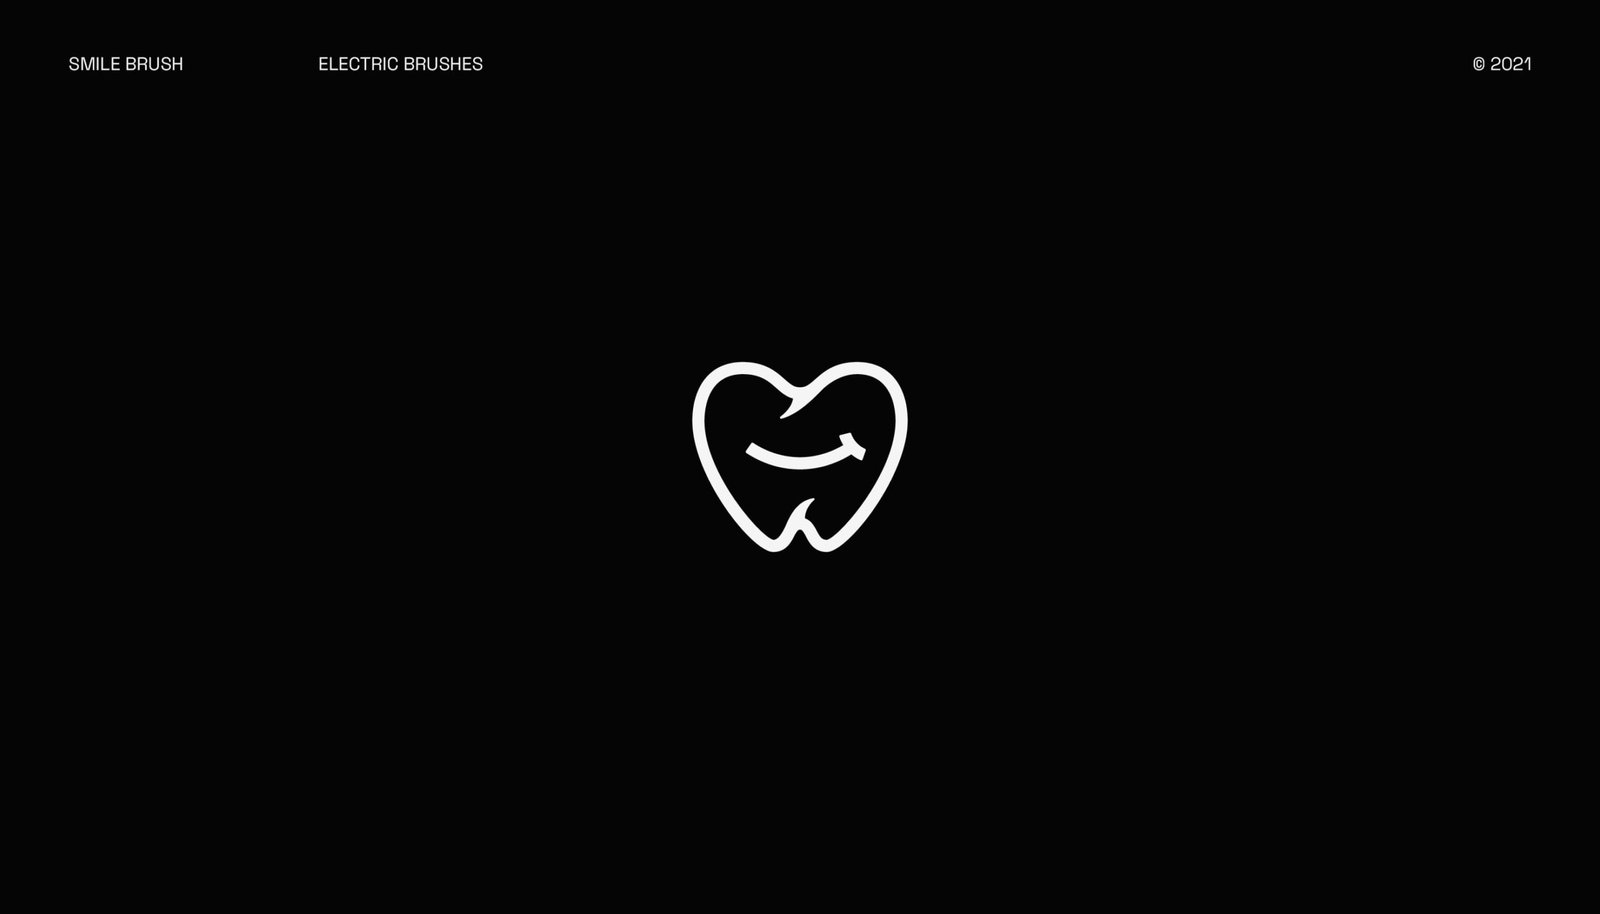 smily tooth mark for an online store that sells electric brushes